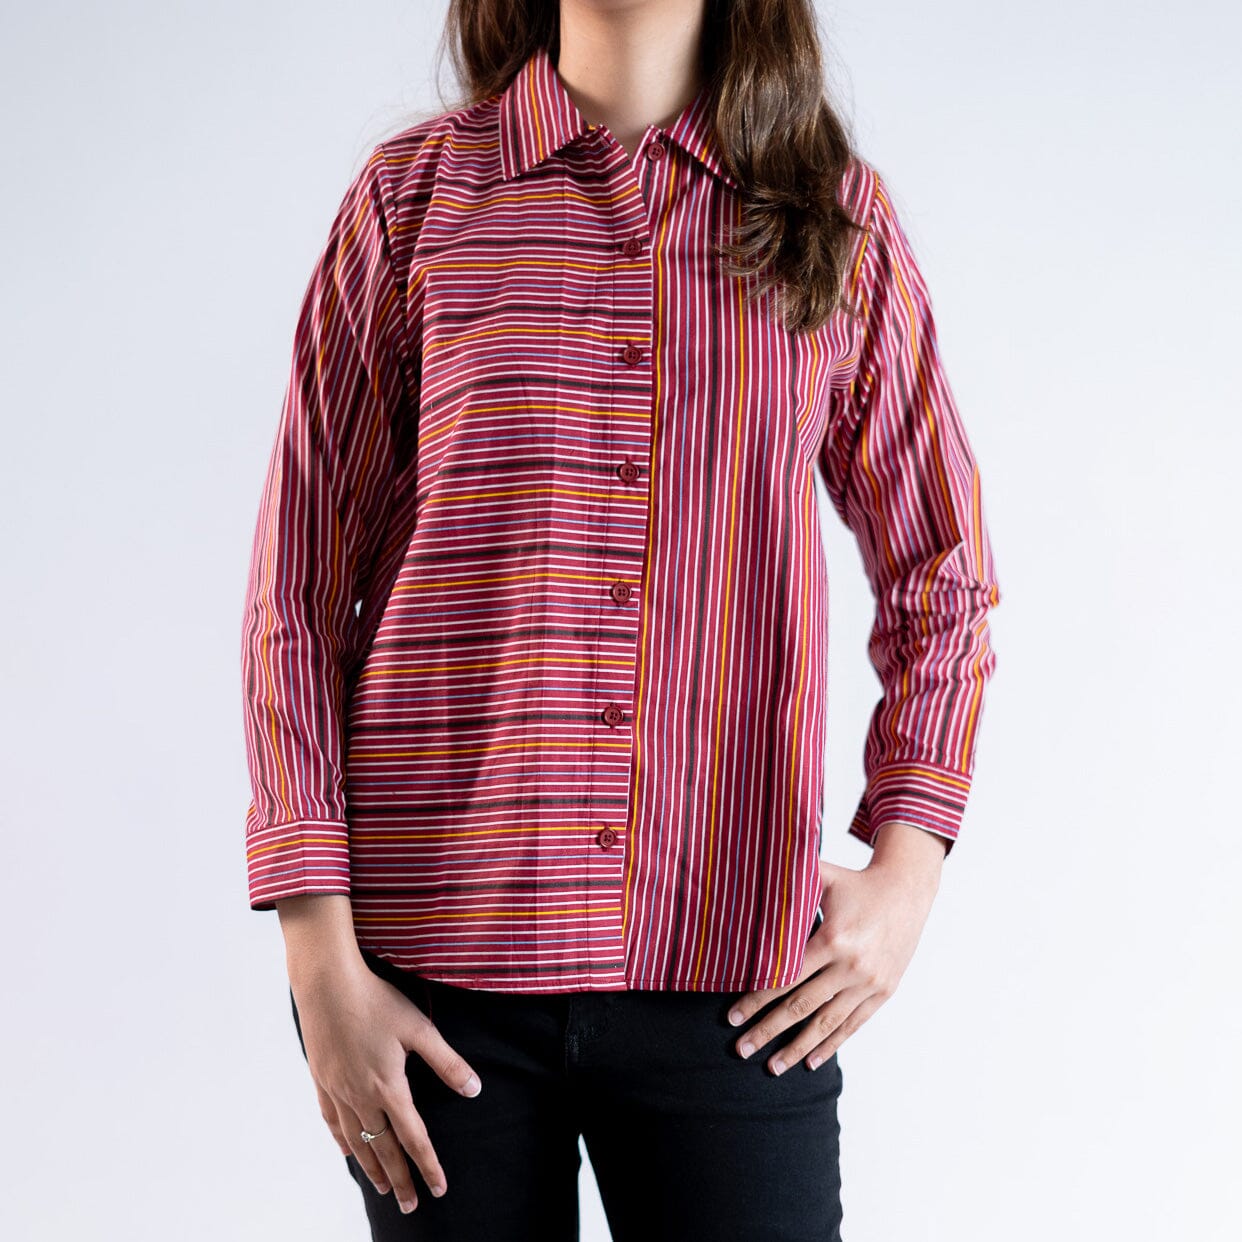 East West Women's Narrow Lining Style Casual Shirt Women's Casual Shirt East West Red & White XS 